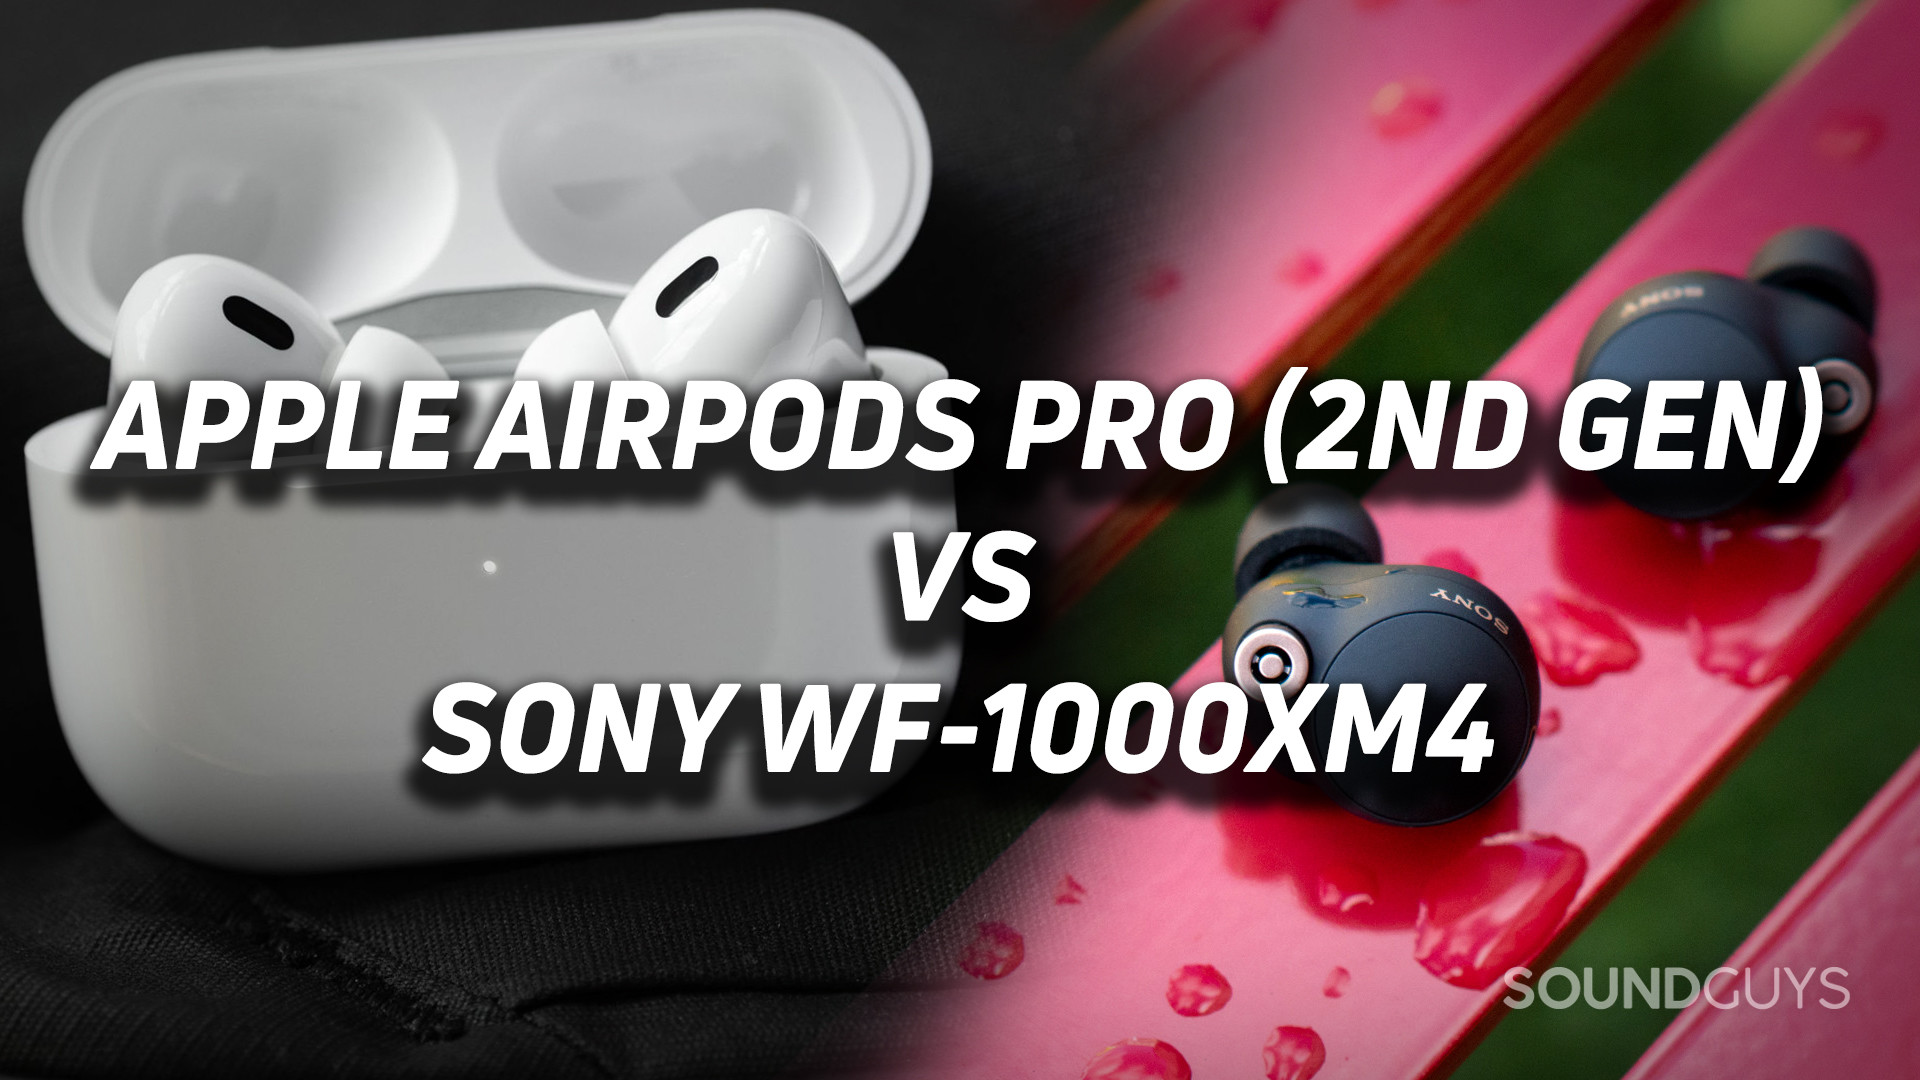 Sony WF-1000XM4 vs AirPods Pro: which wireless earbuds are better?